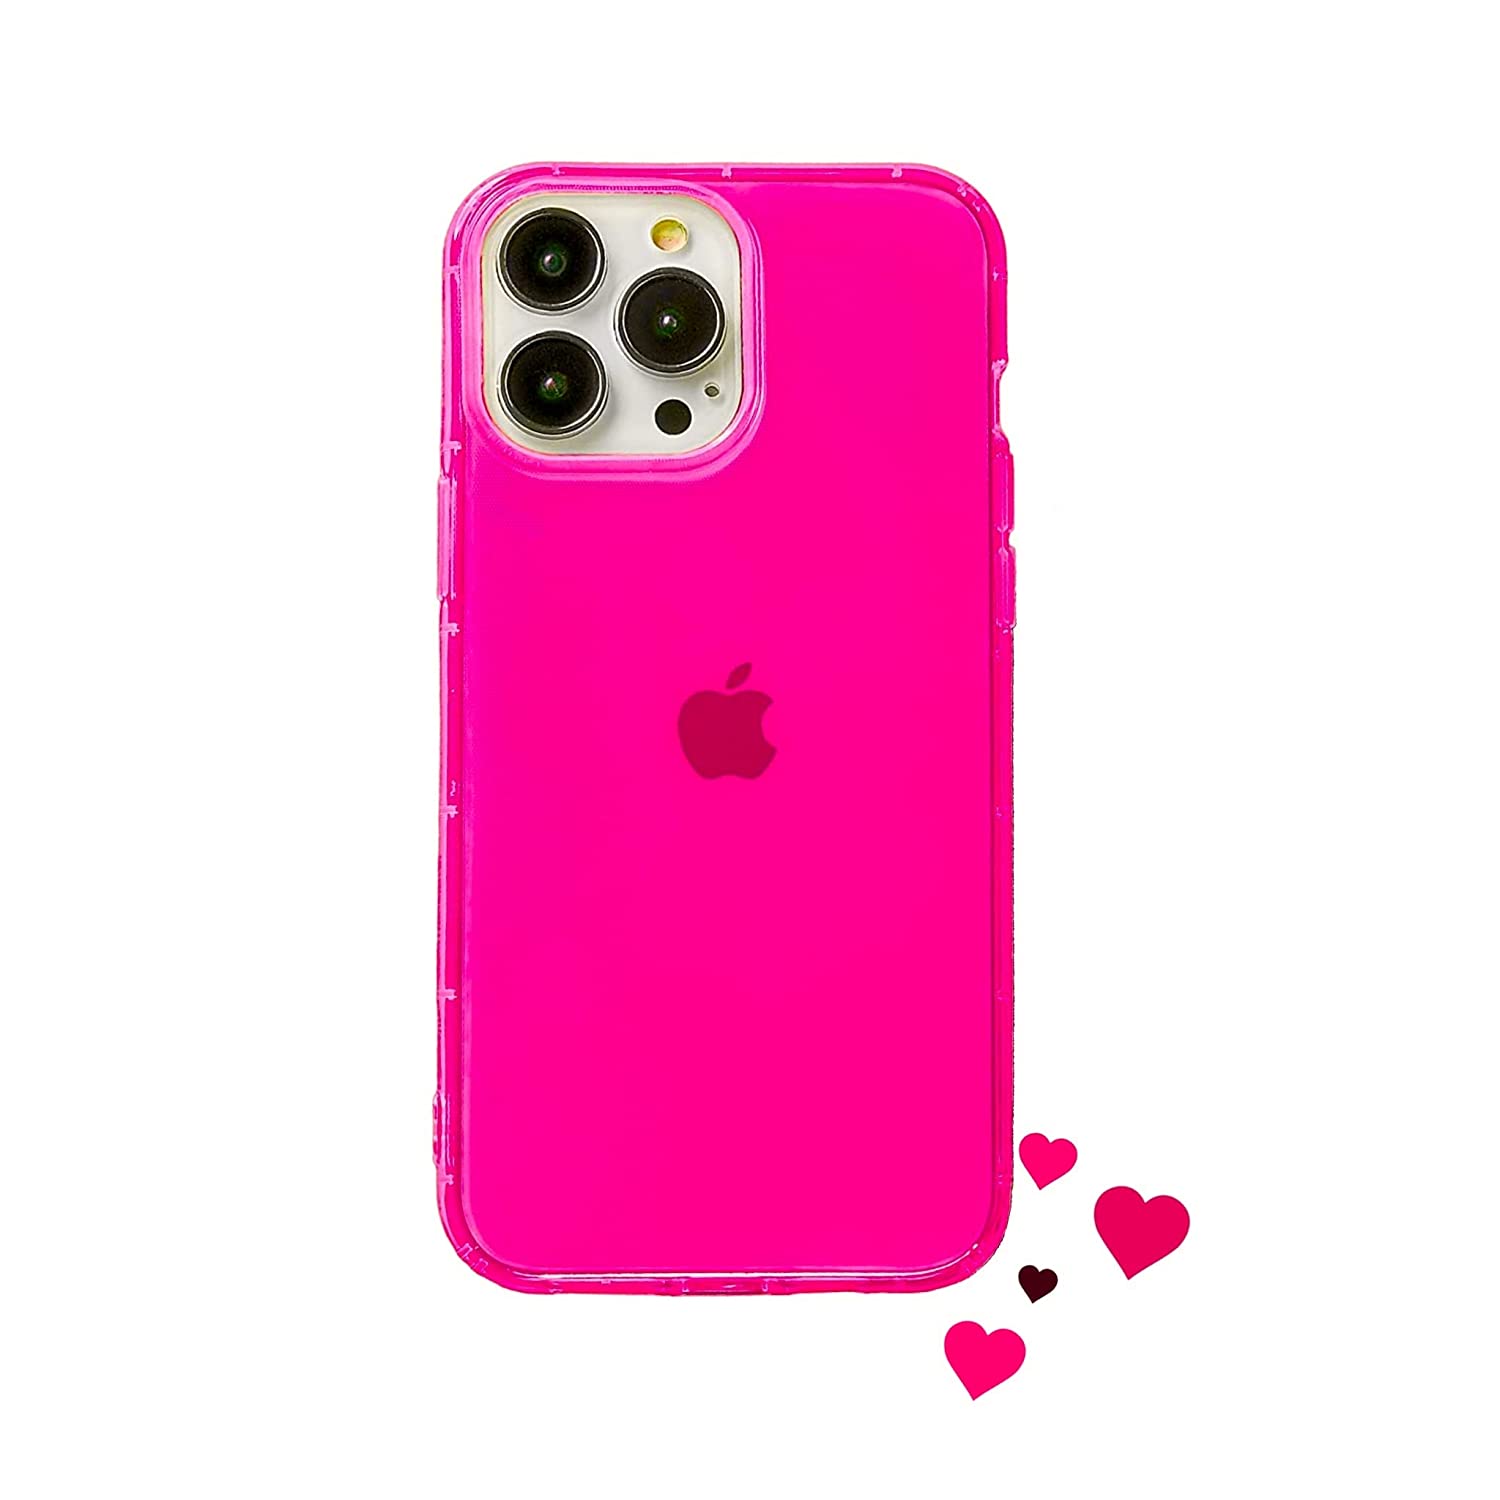 NYCPrimeTech iPhone 13 Pro Max Case/neon Pink Case w/Bumper Edge for iPhone 13 P